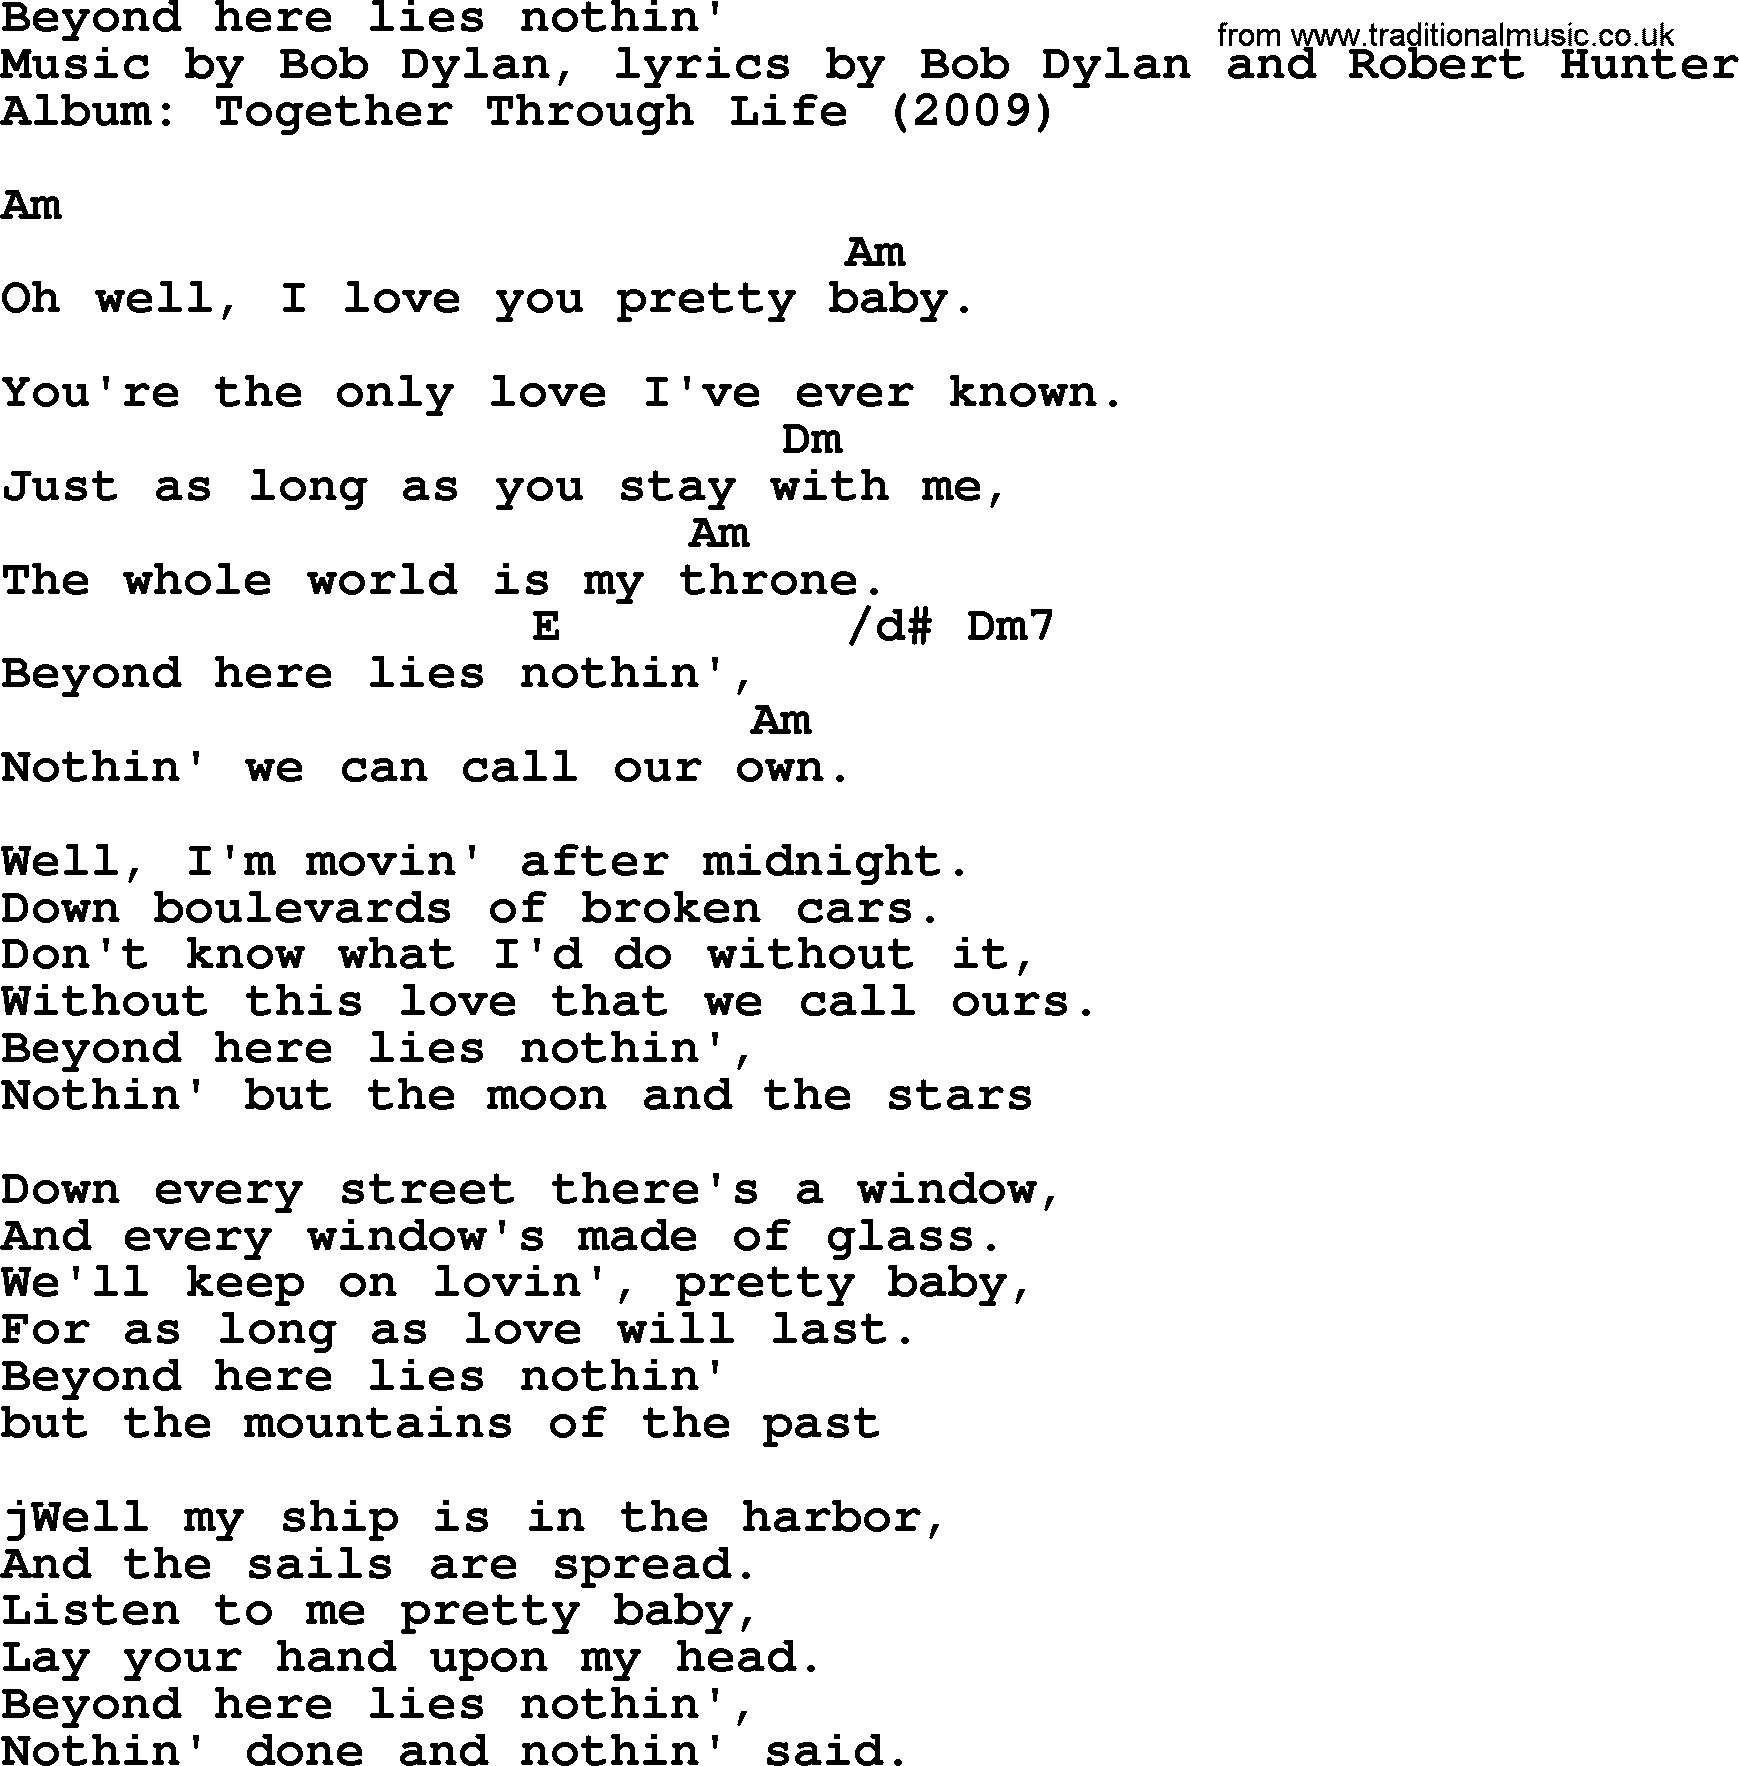 Bob Dylan song, lyrics with chords - Beyond here lies nothin'